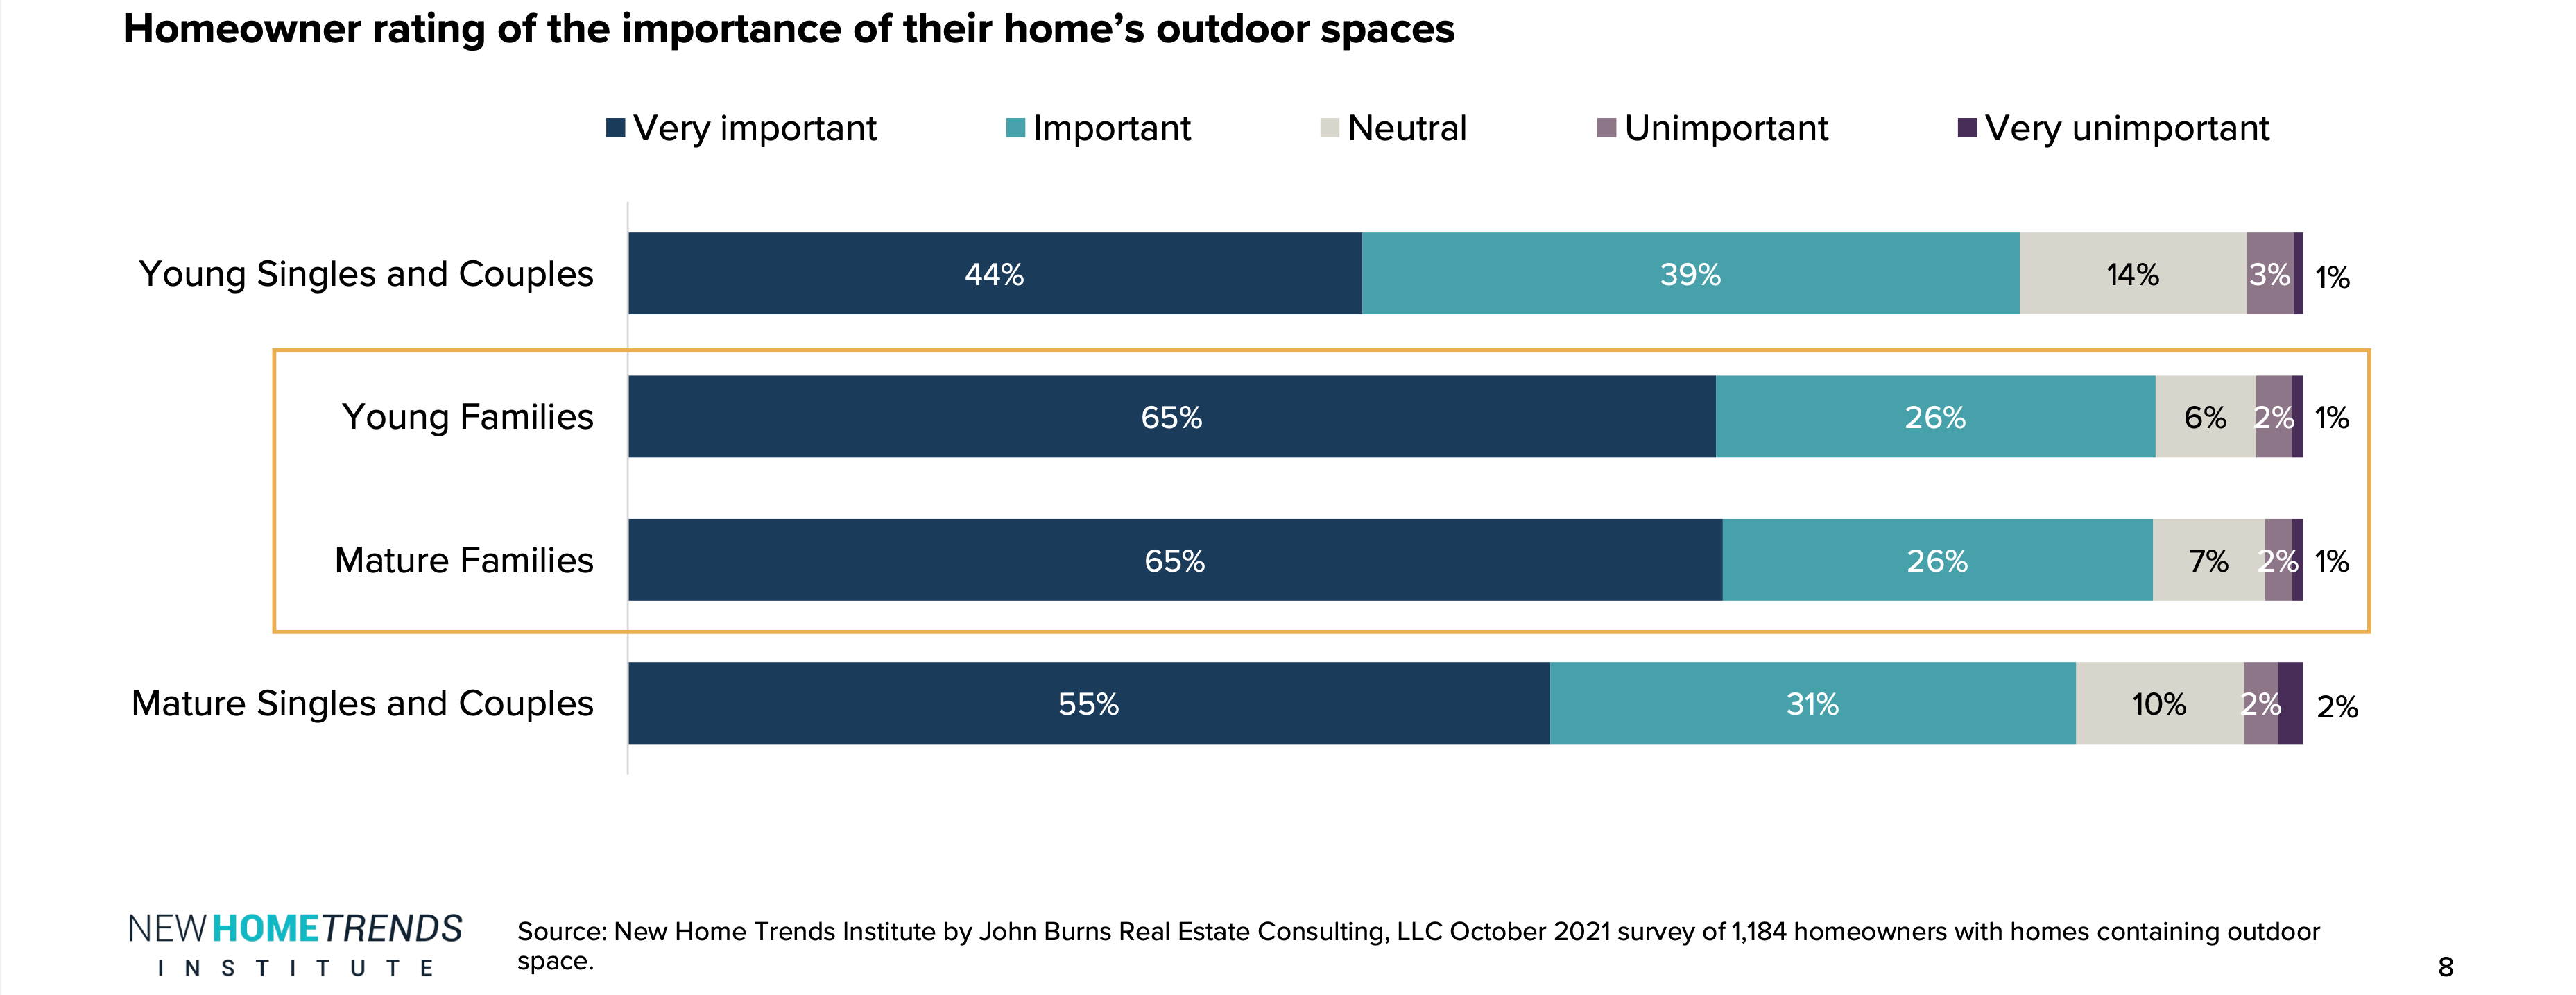 New Home Trends Institute November Survey Insights Report: the importance of a home's outdoor space